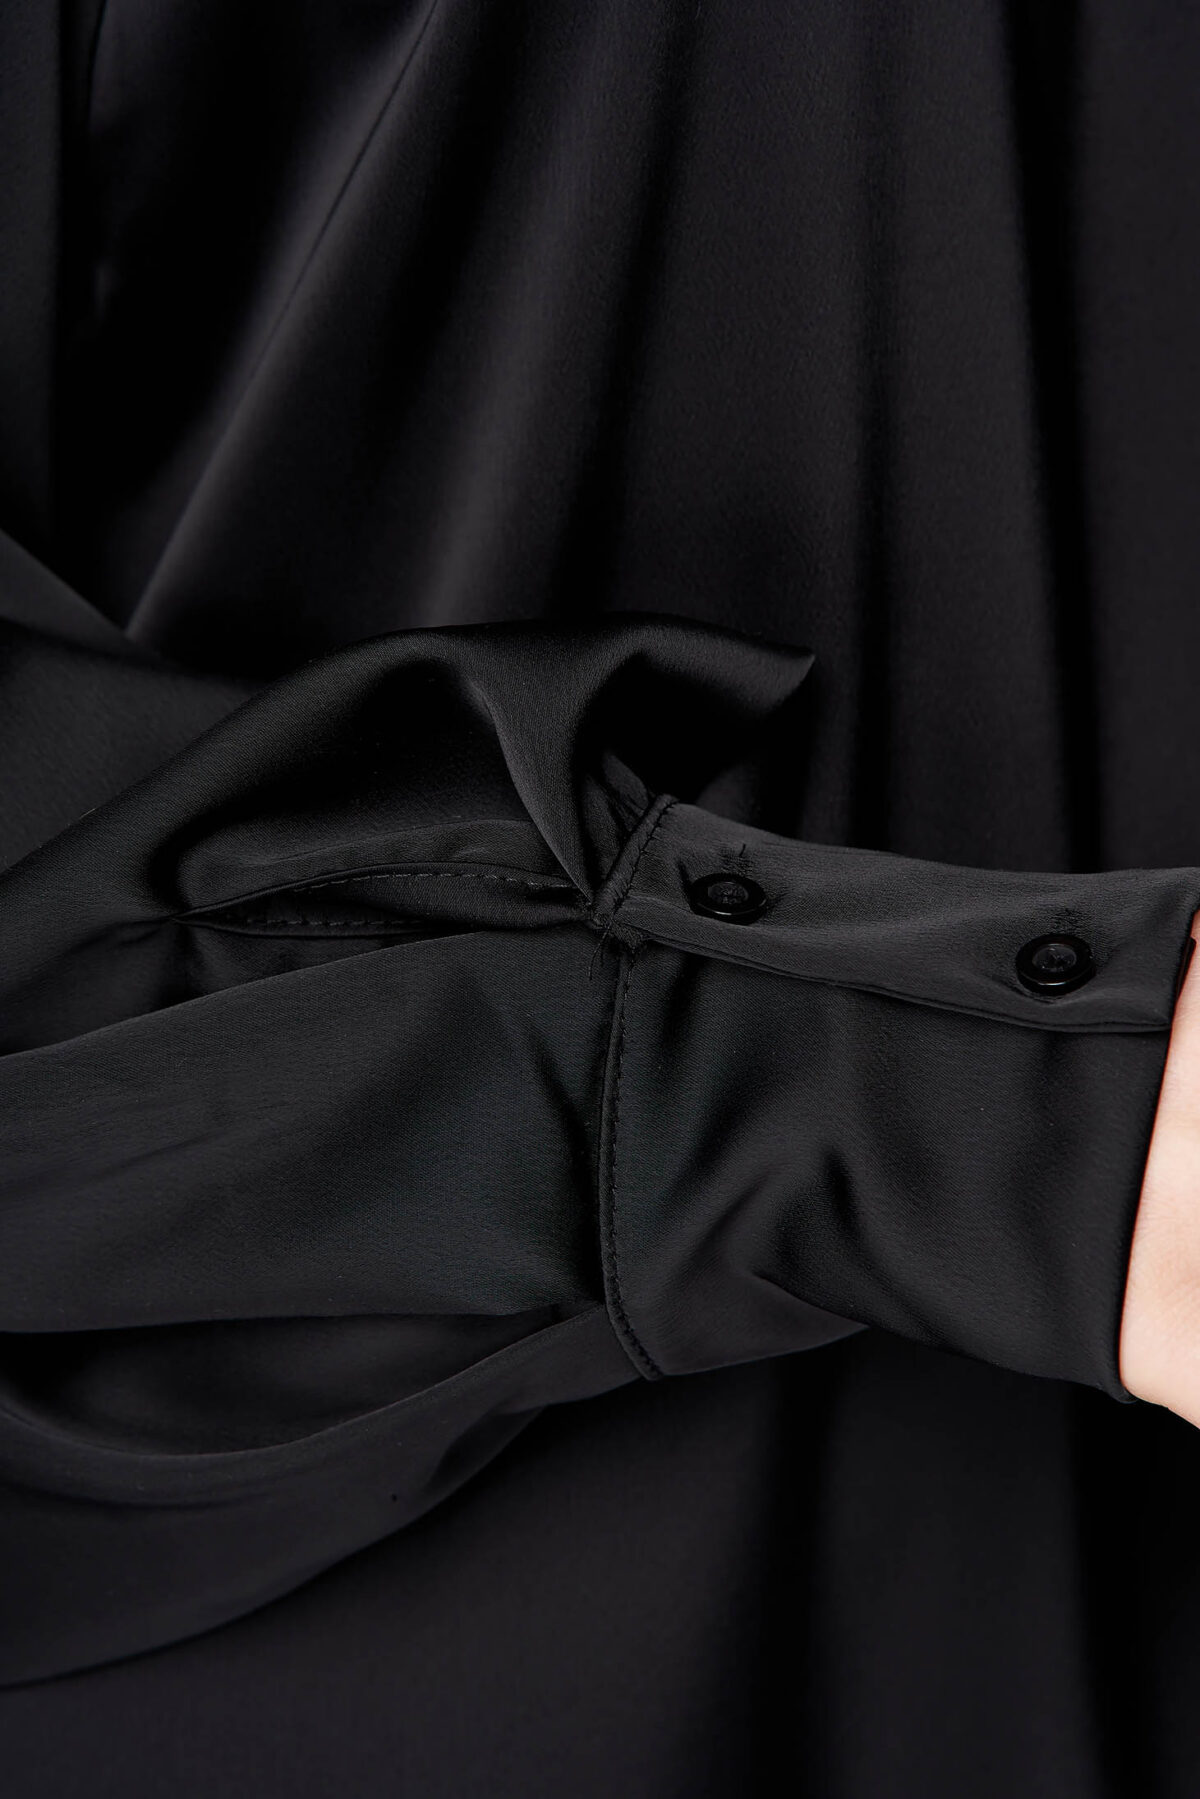 Black Dress From Satin With Puffed Sleeves Loose Fit Bow Accessory